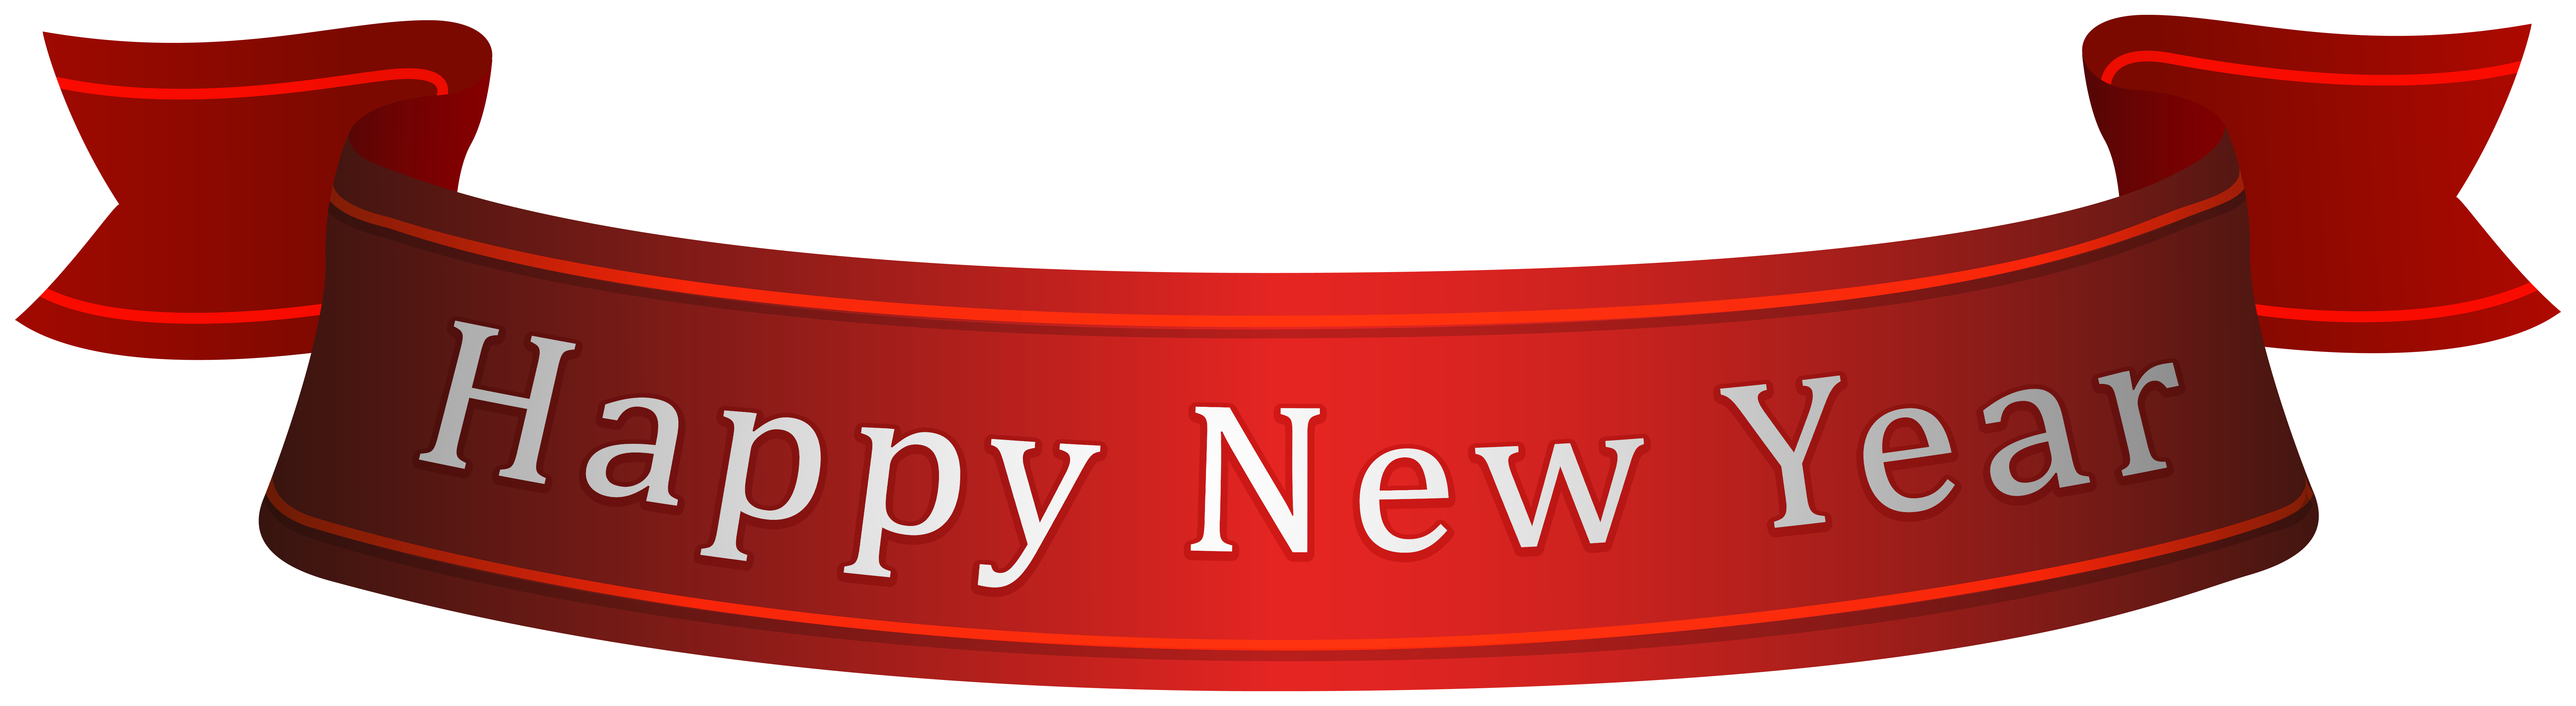 happy-new-year-banner-red-png-clipart-gallery-yopriceville-high